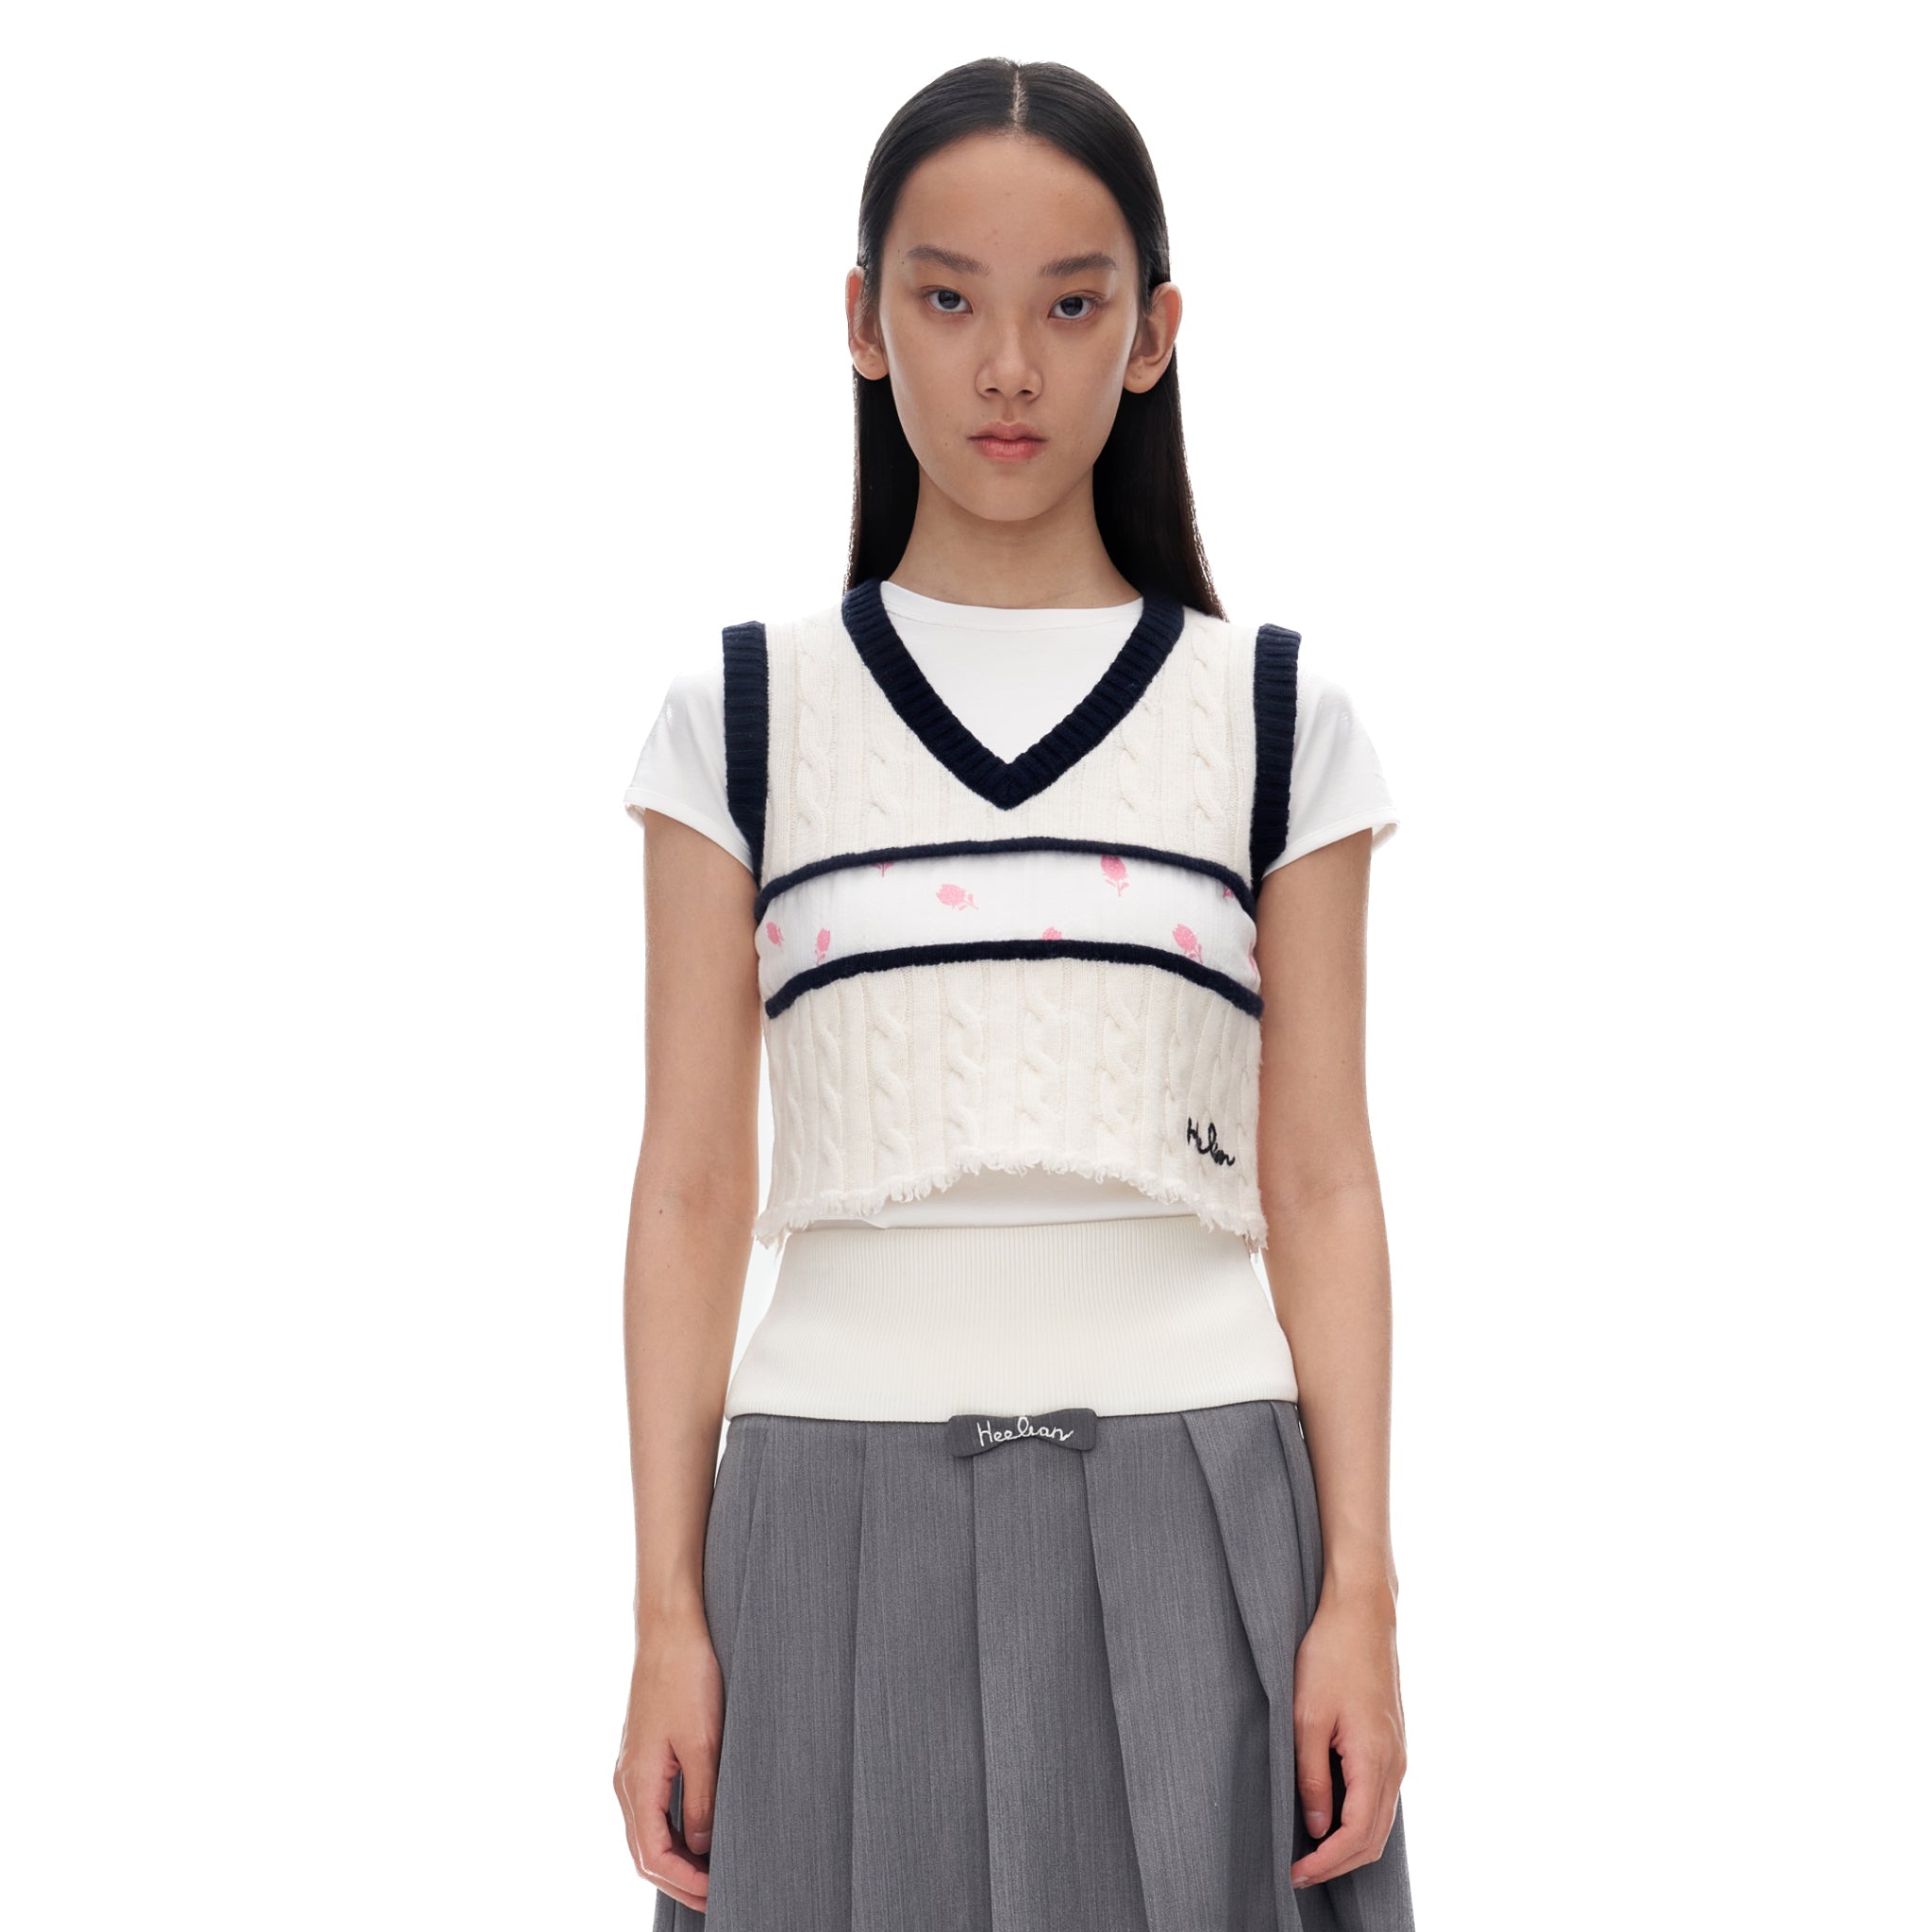 HERLIAN Strawberry Cable Knit V-neck Vest | MADA IN CHINA